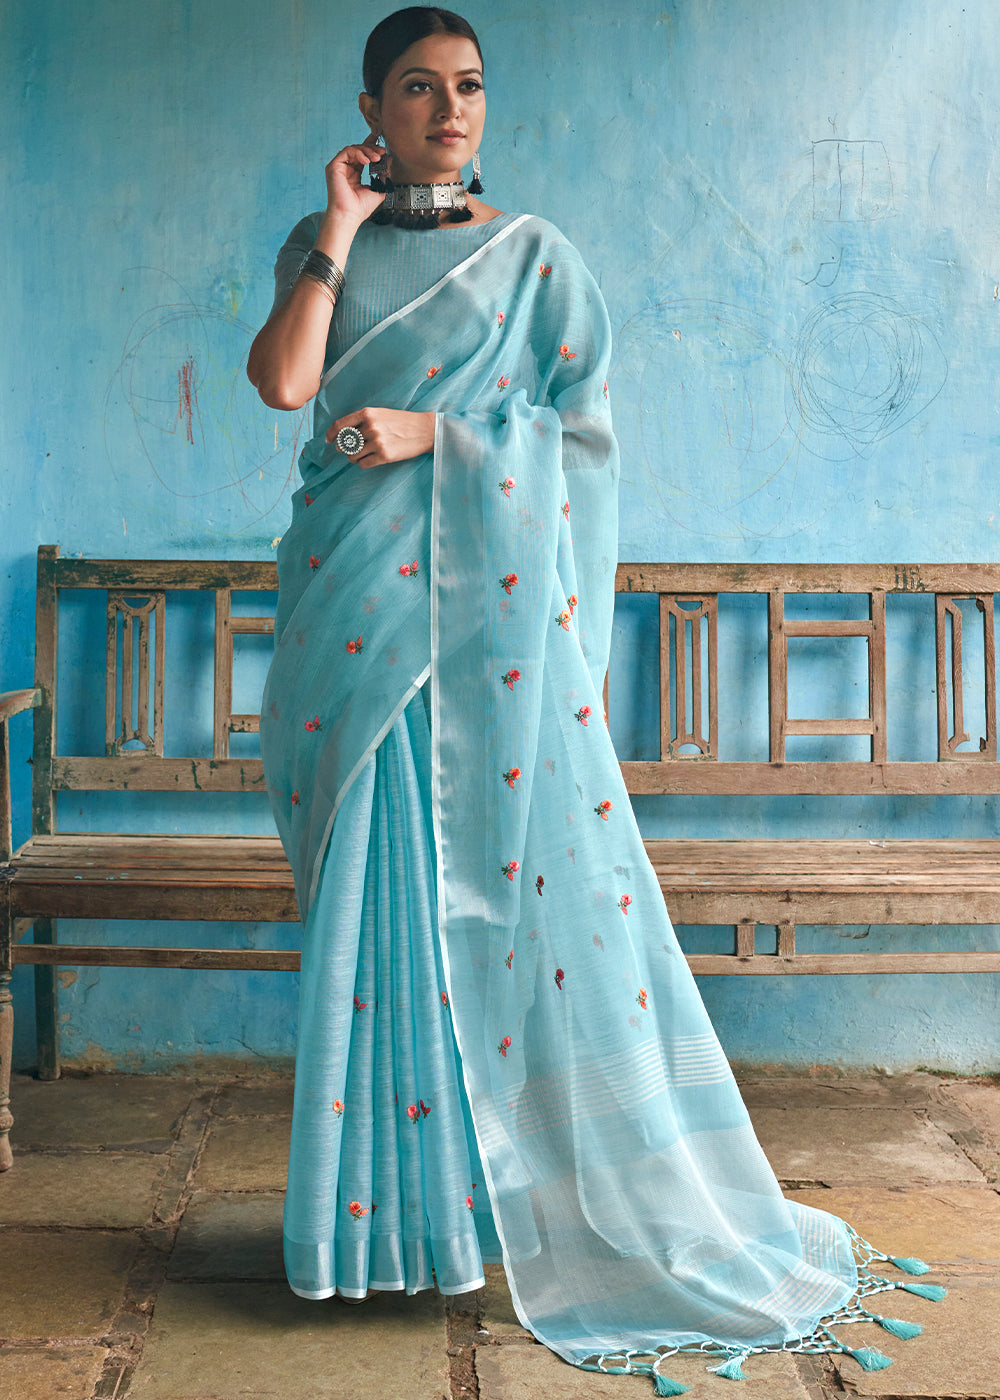 Serene Skies: A Sky Blue Linen Saree for Tranquil Beauty